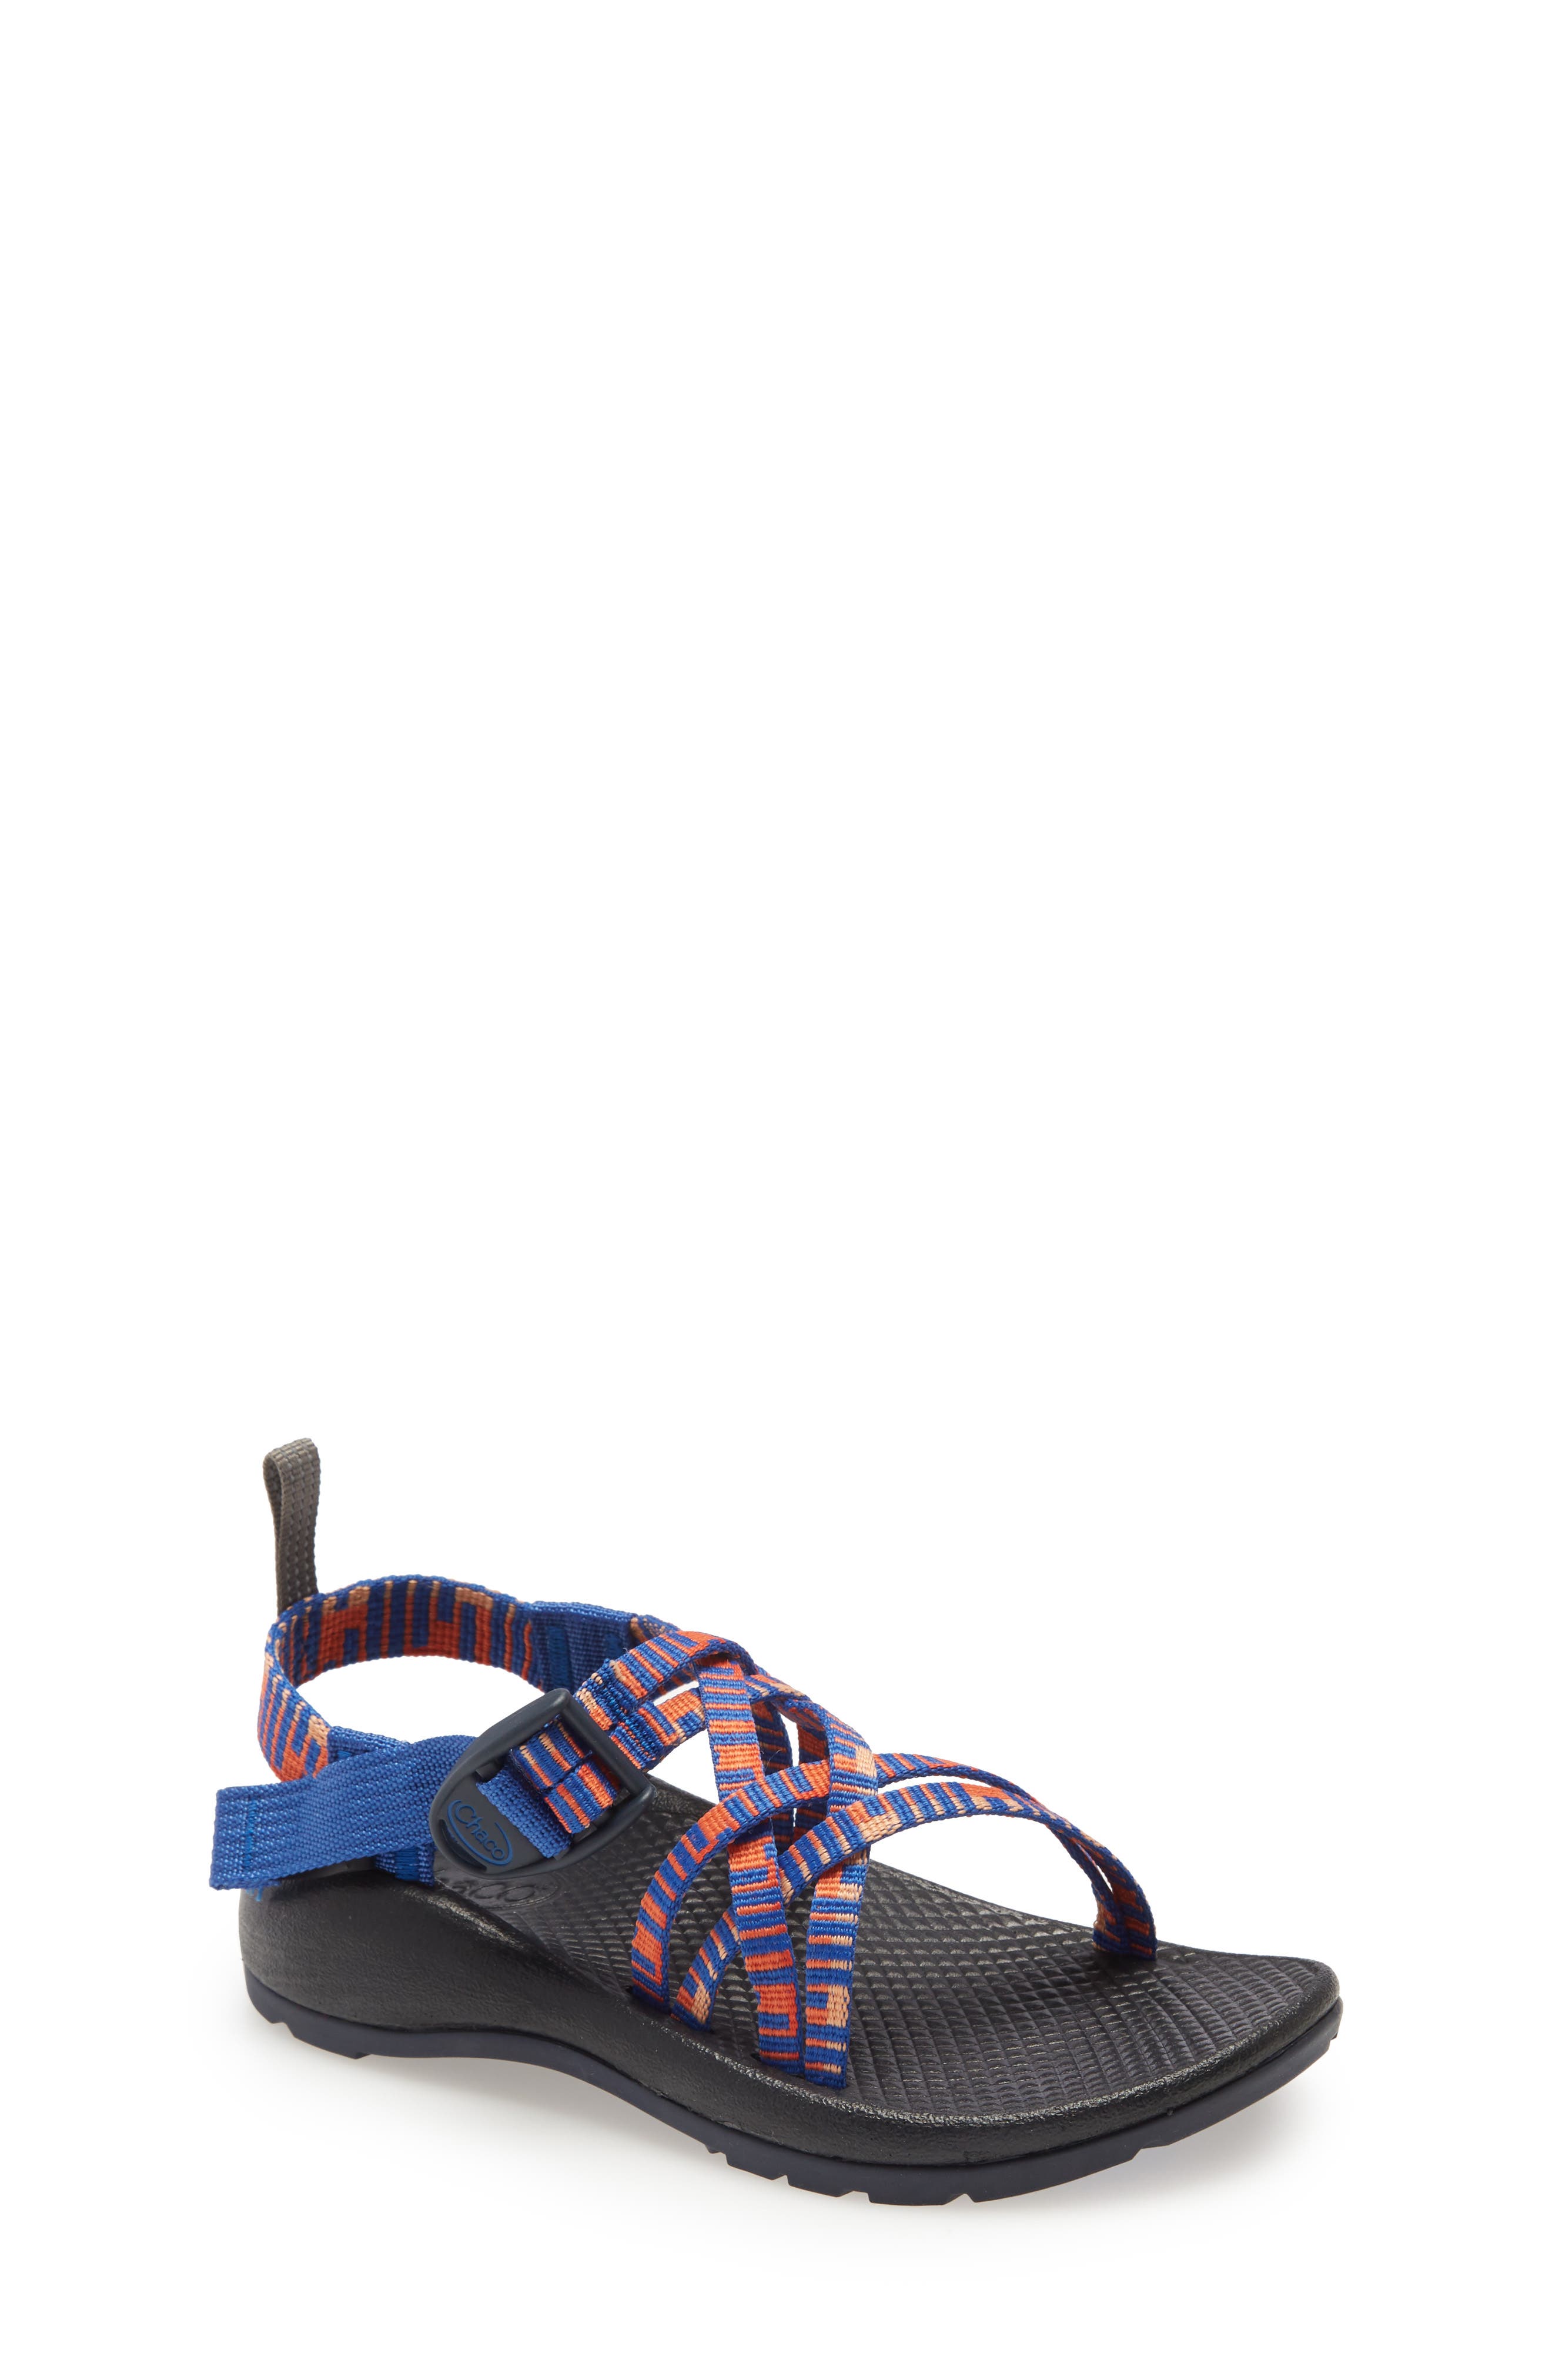 chaco shoes kids